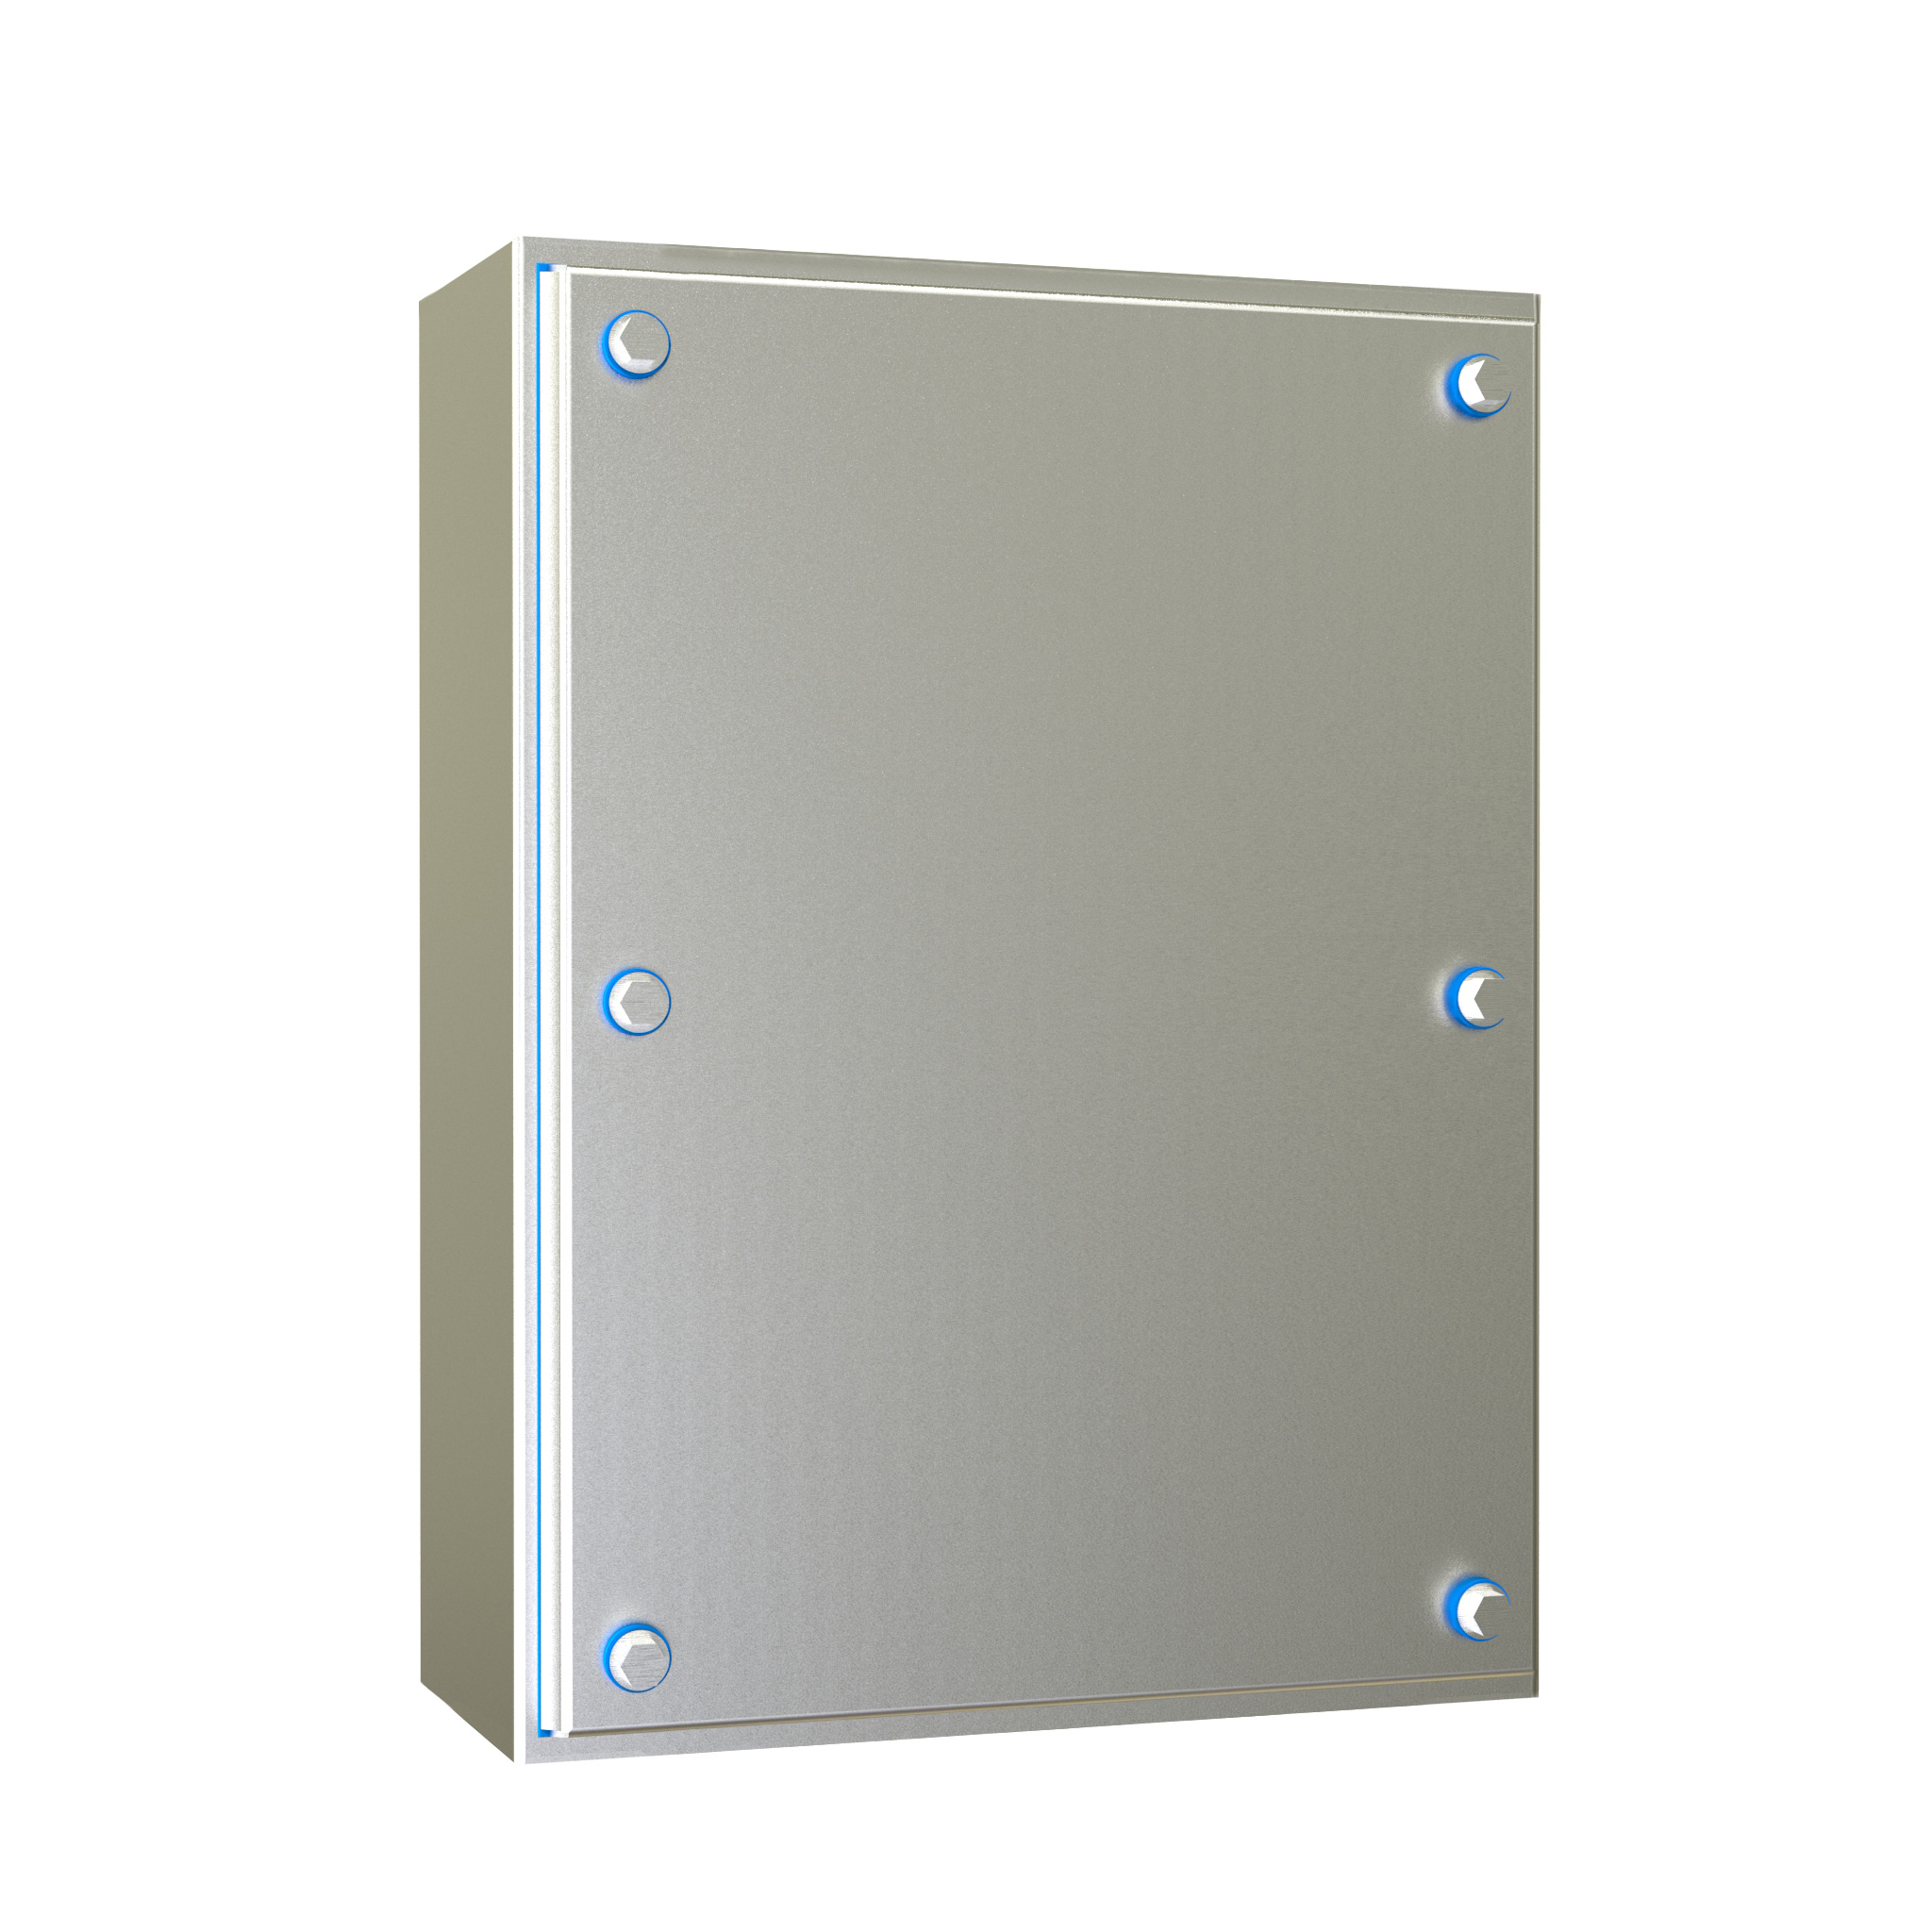 Hammond Manufacturing - Hygienic Type 4X Stainless Steel Junction Box